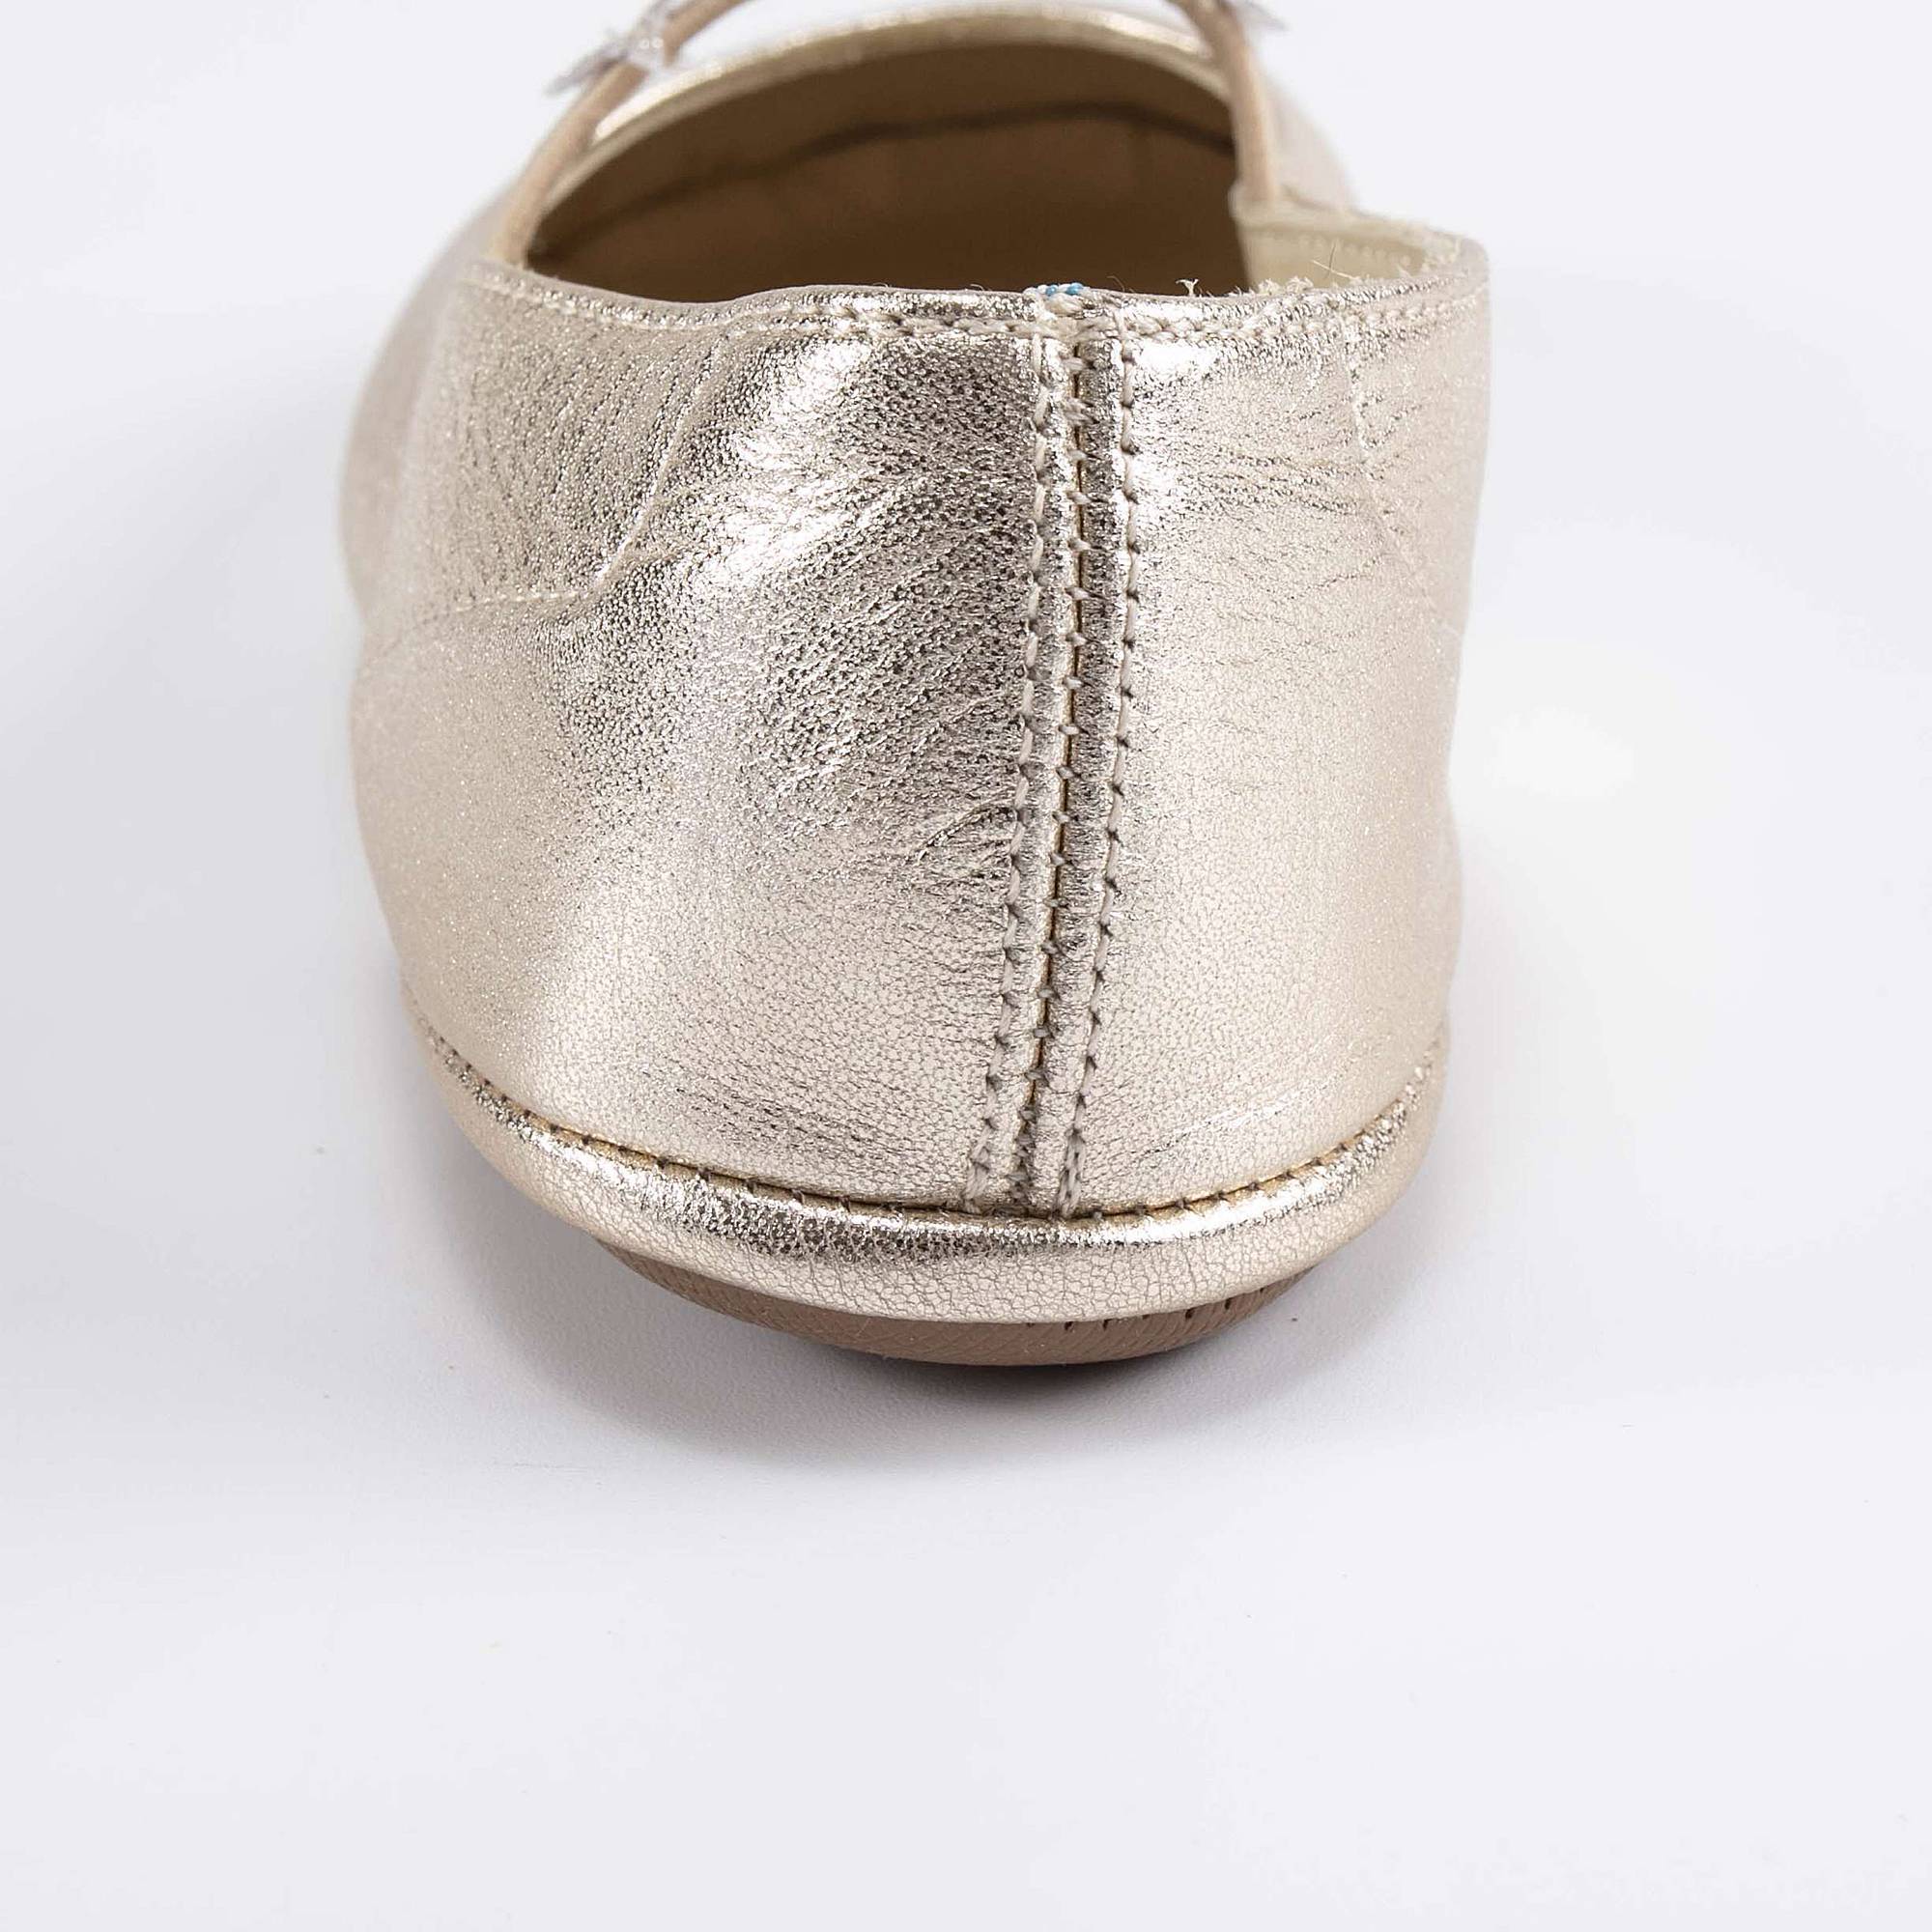 Girls Gold Stars Leather Shoes